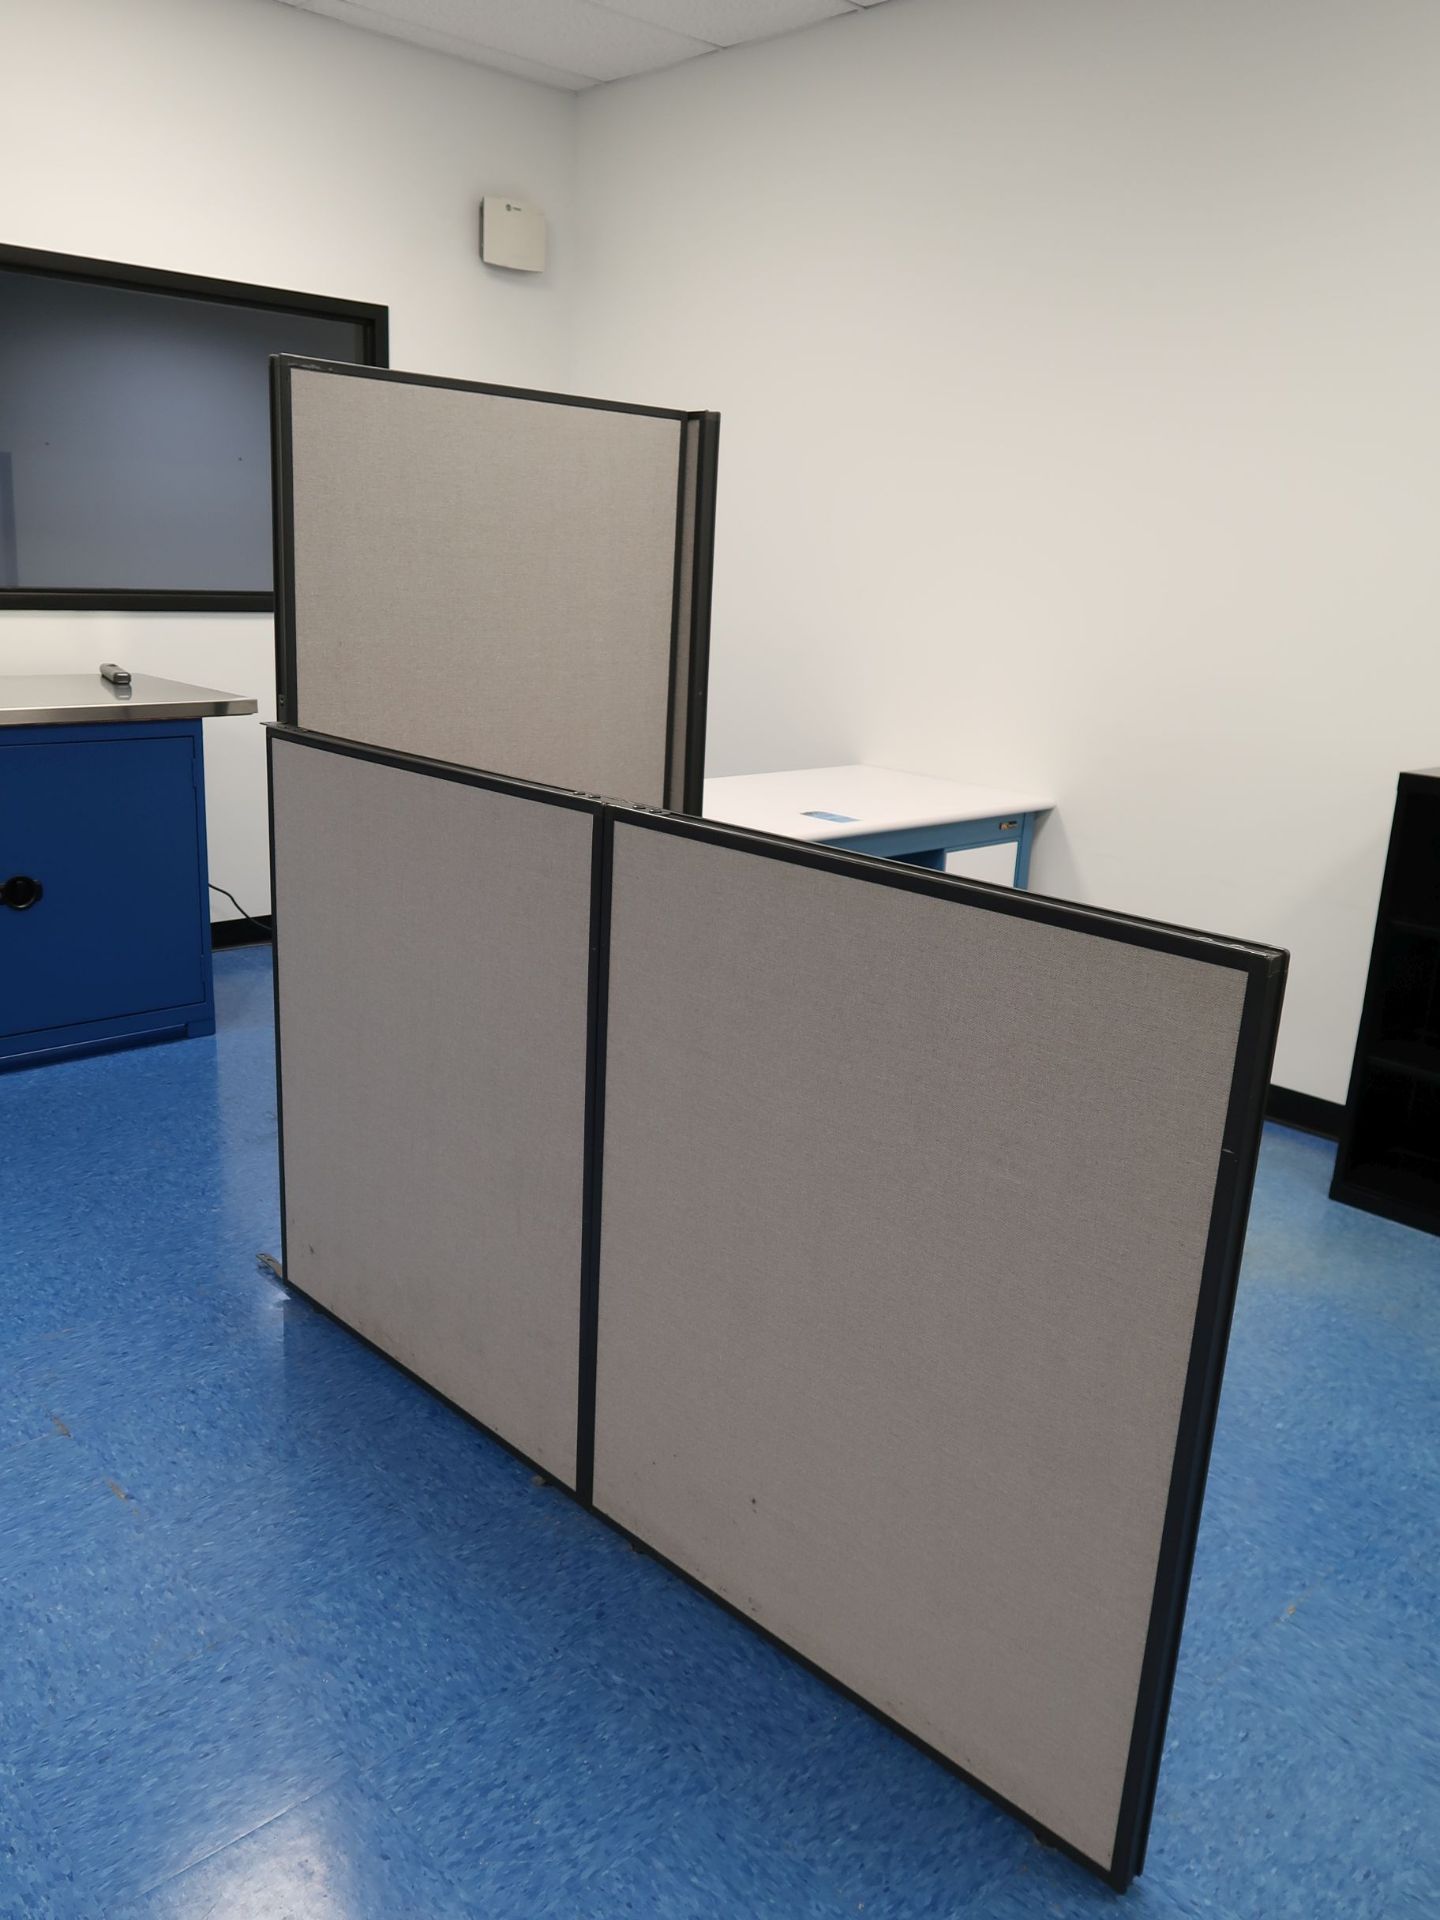 PANELS 36" WIDE BUSH CLOTH COVERED OFFICE WALL PARTITIONS